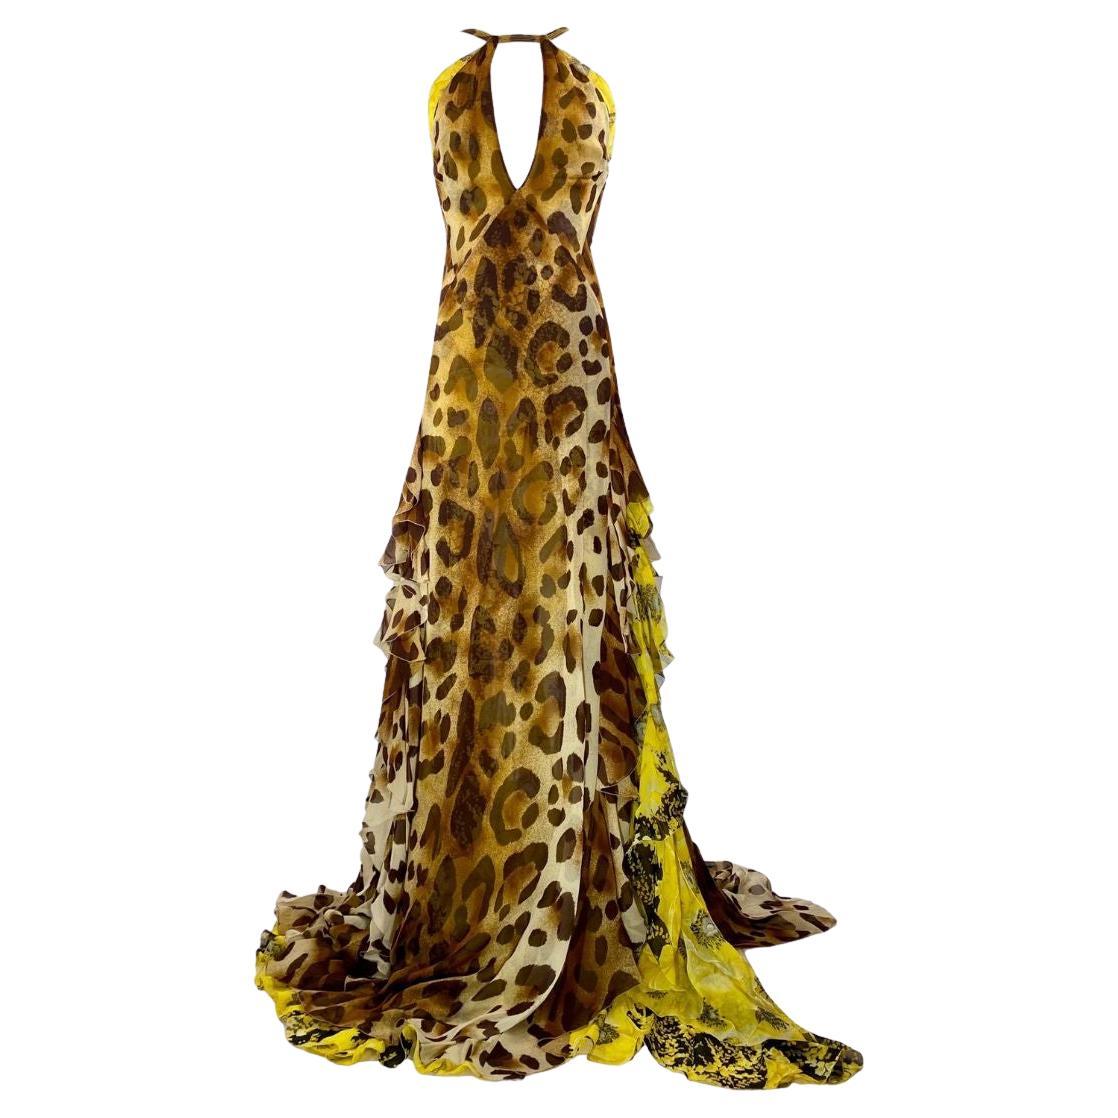 Gianni Versace Couture Vintage Leopard Evening Gown Size 40IT Spring/Summer 2002 In Good Condition For Sale In Saint Petersburg, FL